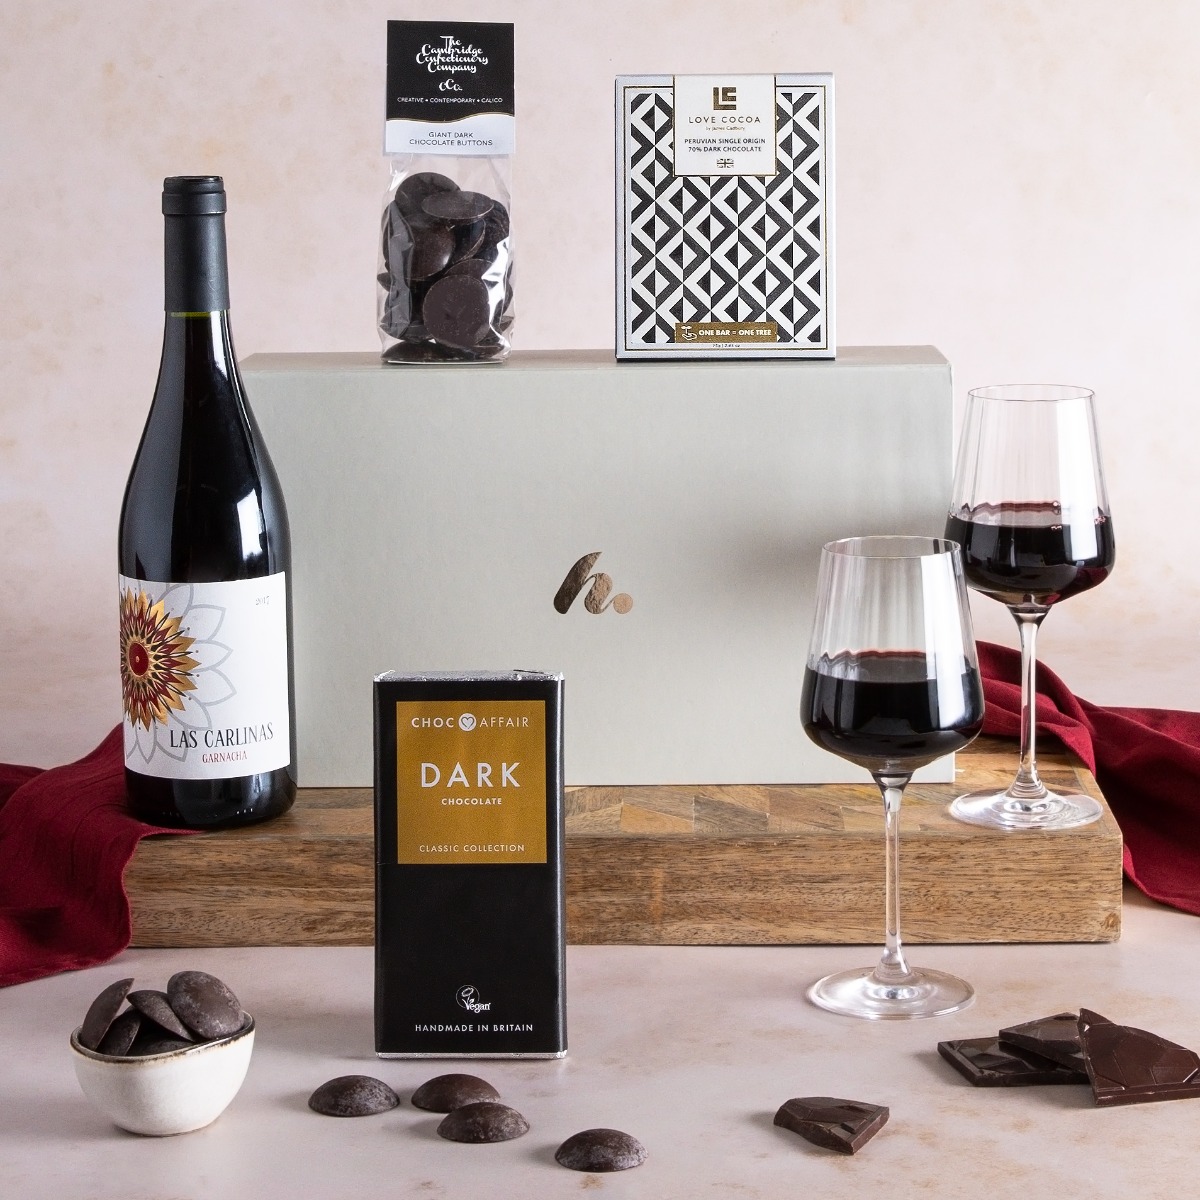 Red Wine & Dark Chocolate Gift Box - Valentine's gift for him - with contents on display